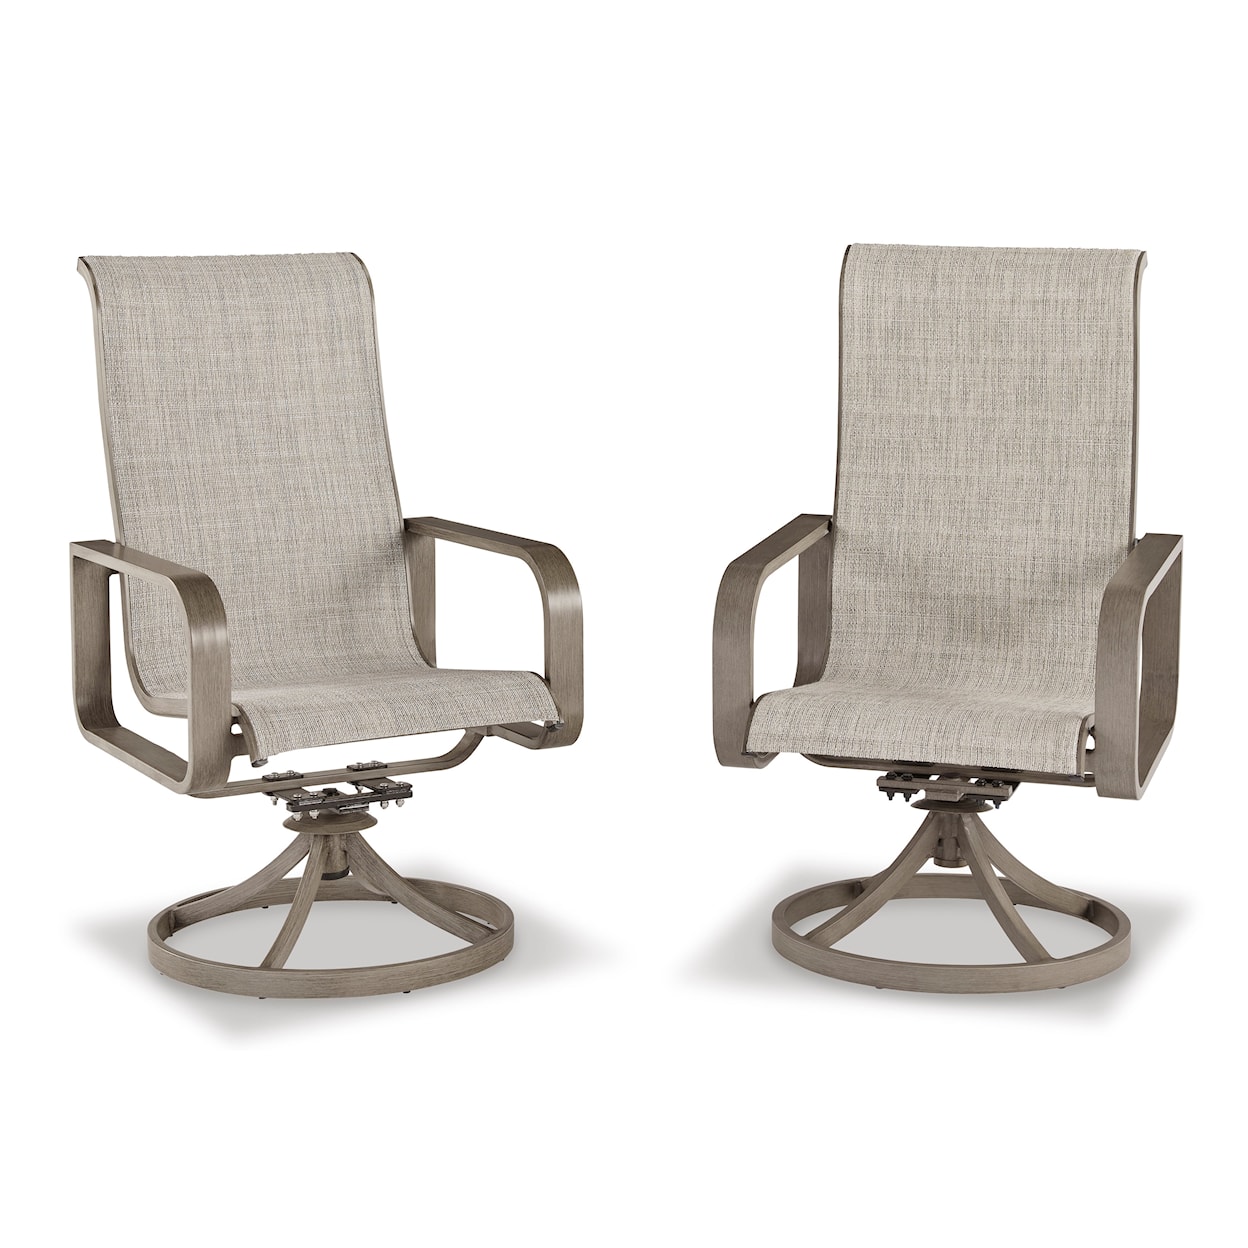 Signature Design by Ashley Beach Front Front Sling Swivel Chair (Set of 2)